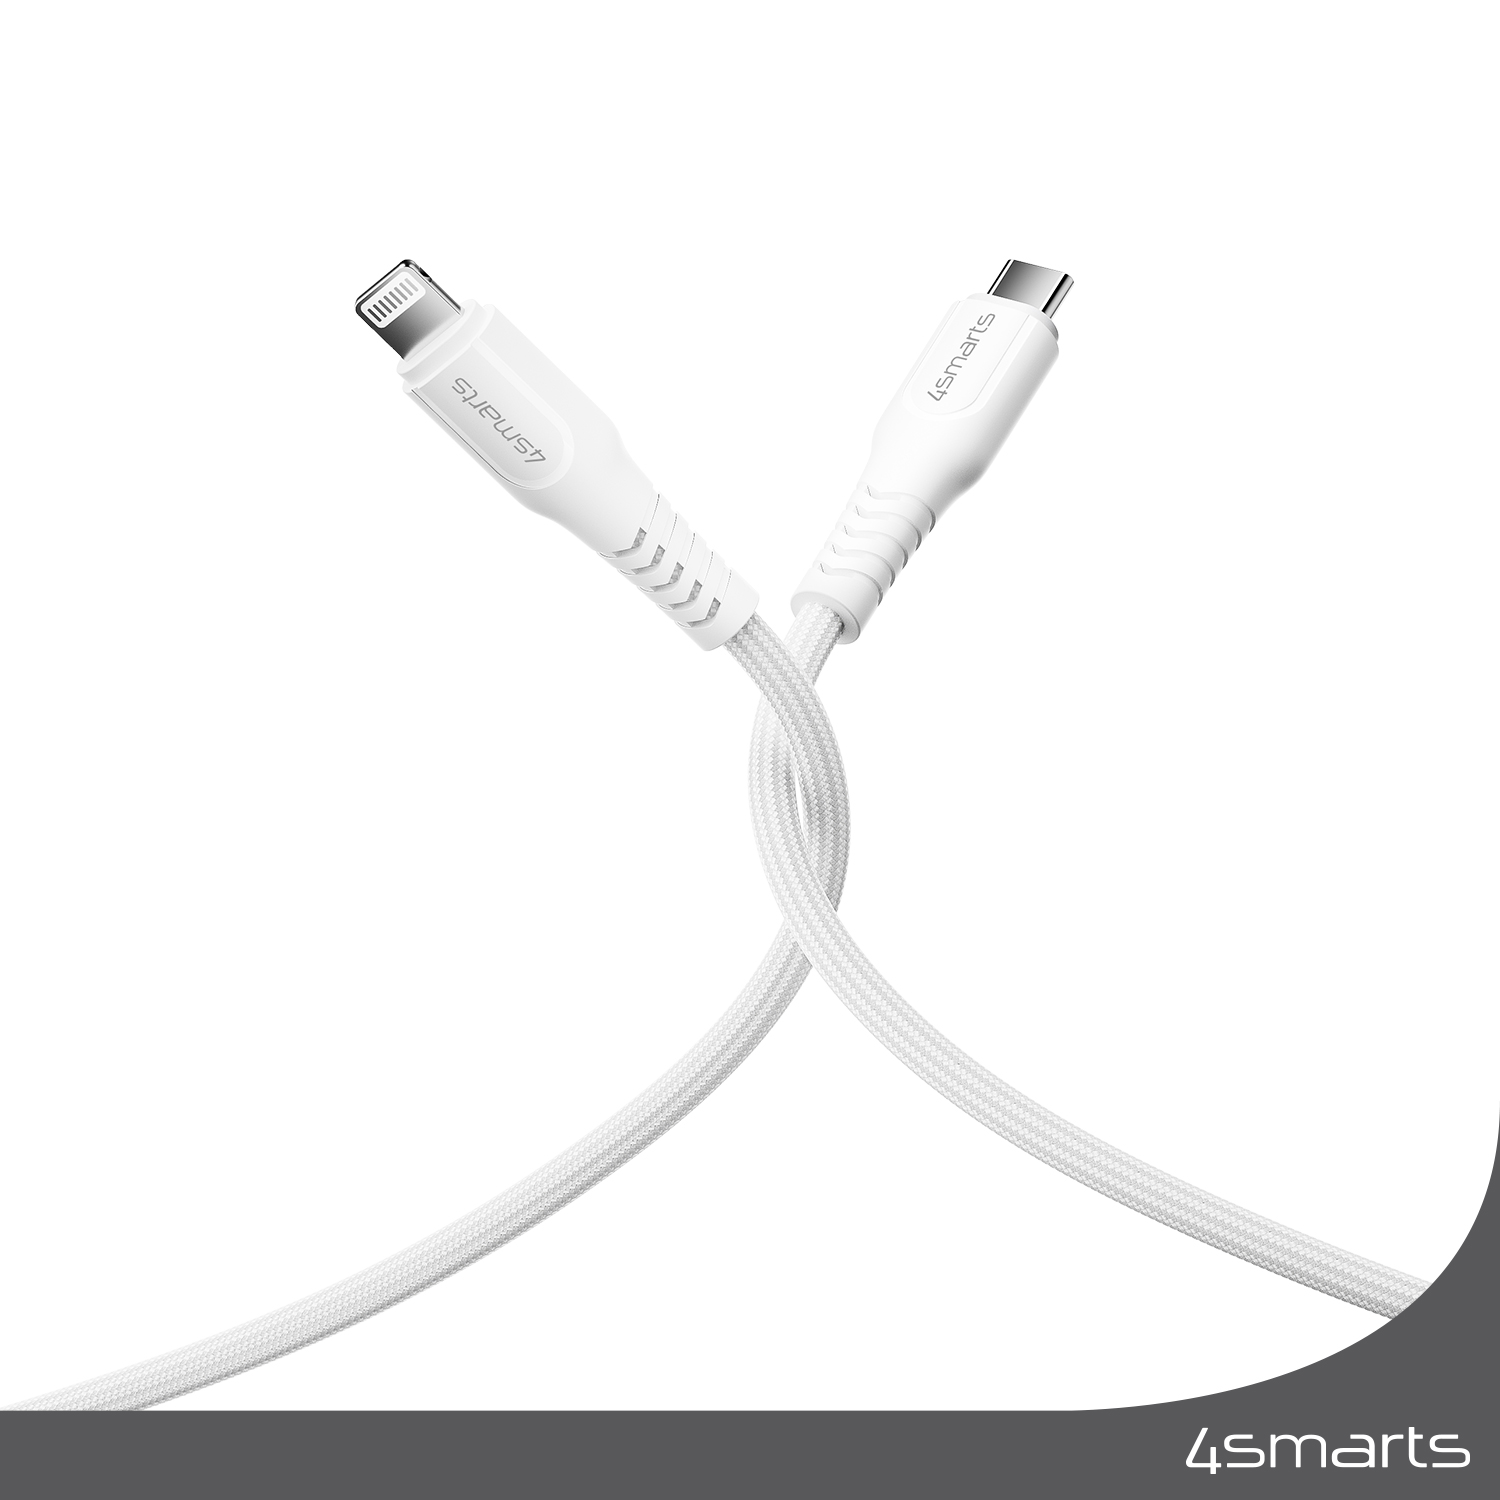 The 4smarts USB-C to Lightning cable RapidCord PD 30W was manufactured and optimized especially for Apple devices.